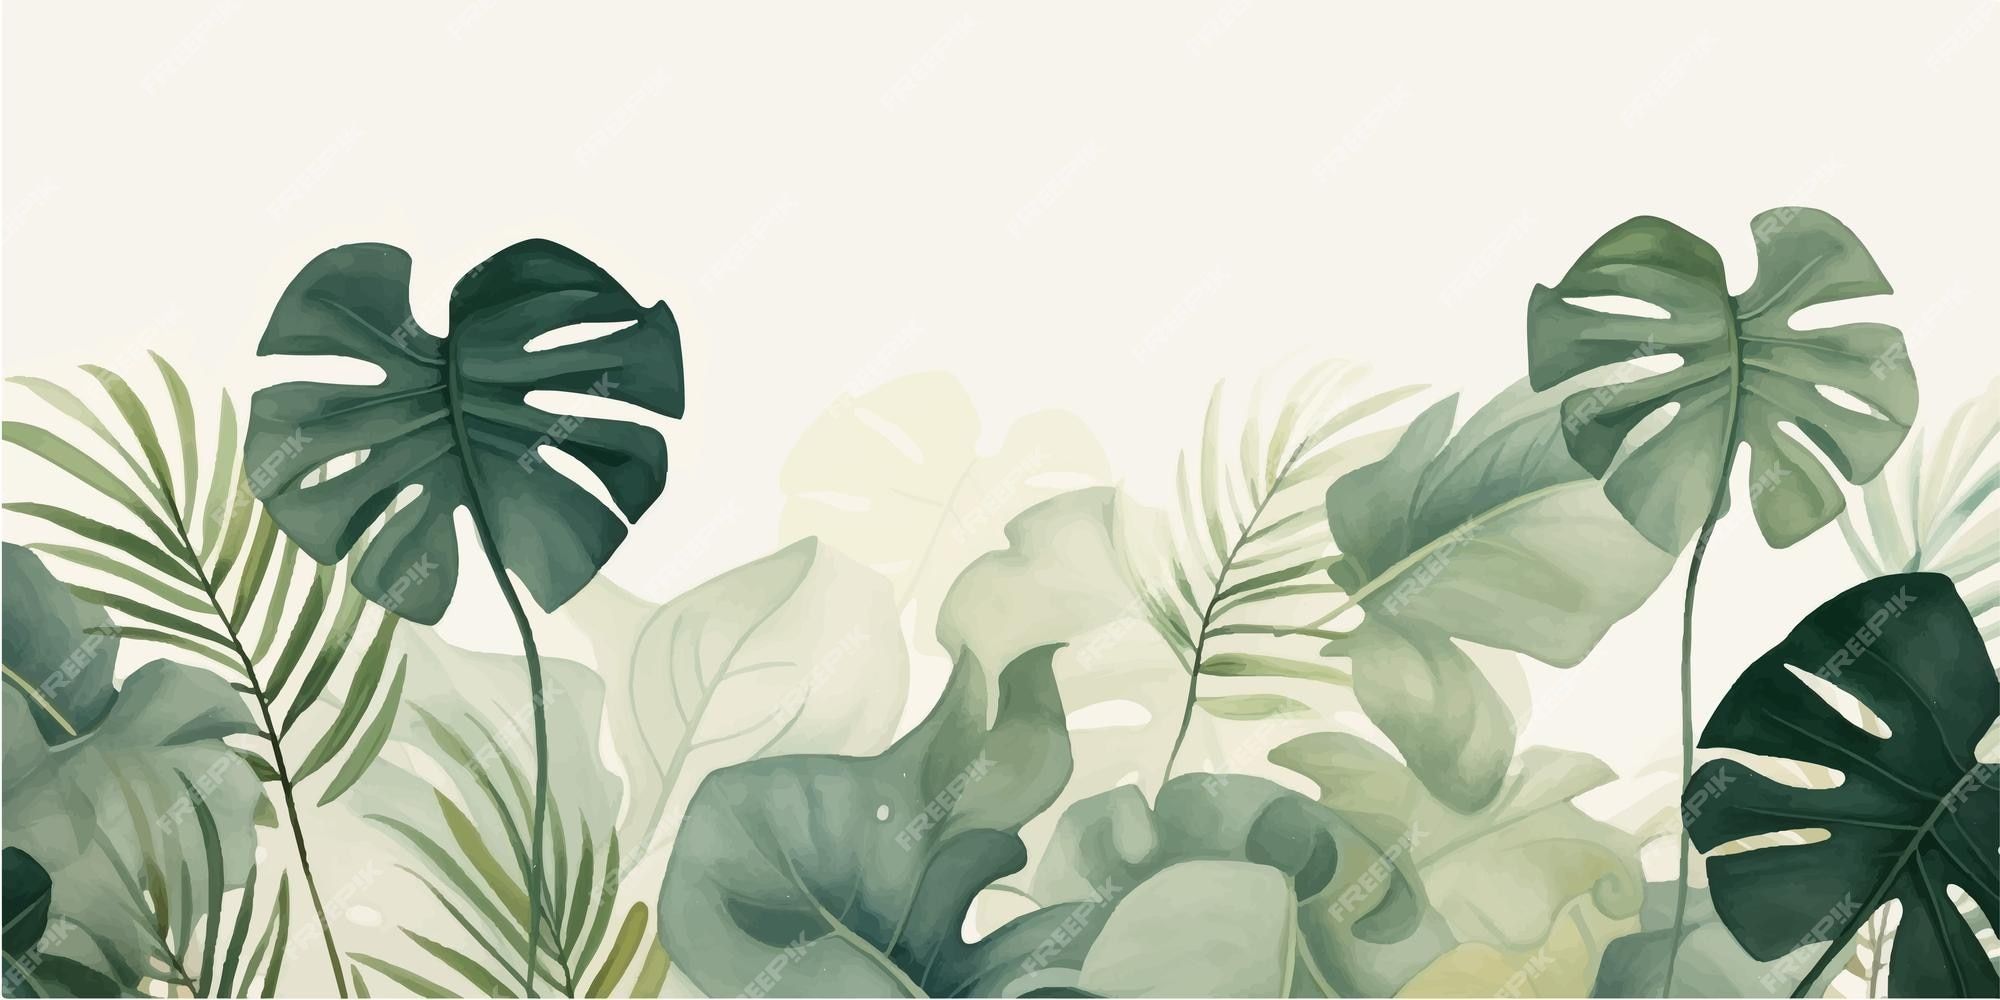 A background illustration of tropical leaves - Monstera